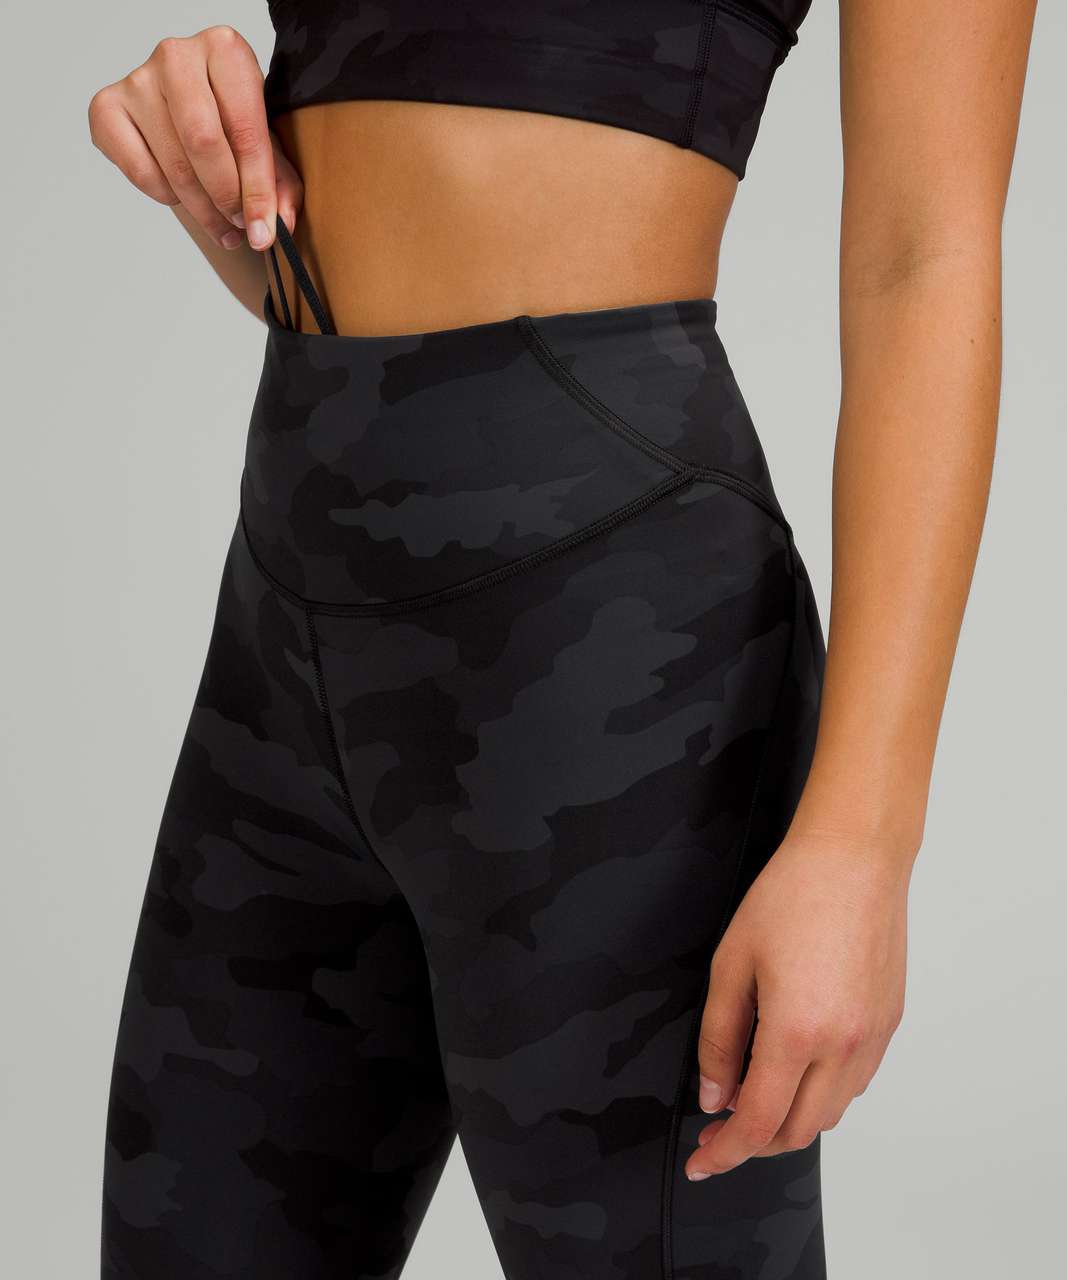 LULULEMON Base Pace High-Rise HR Crop 23 Camouflage Running Pant Tight